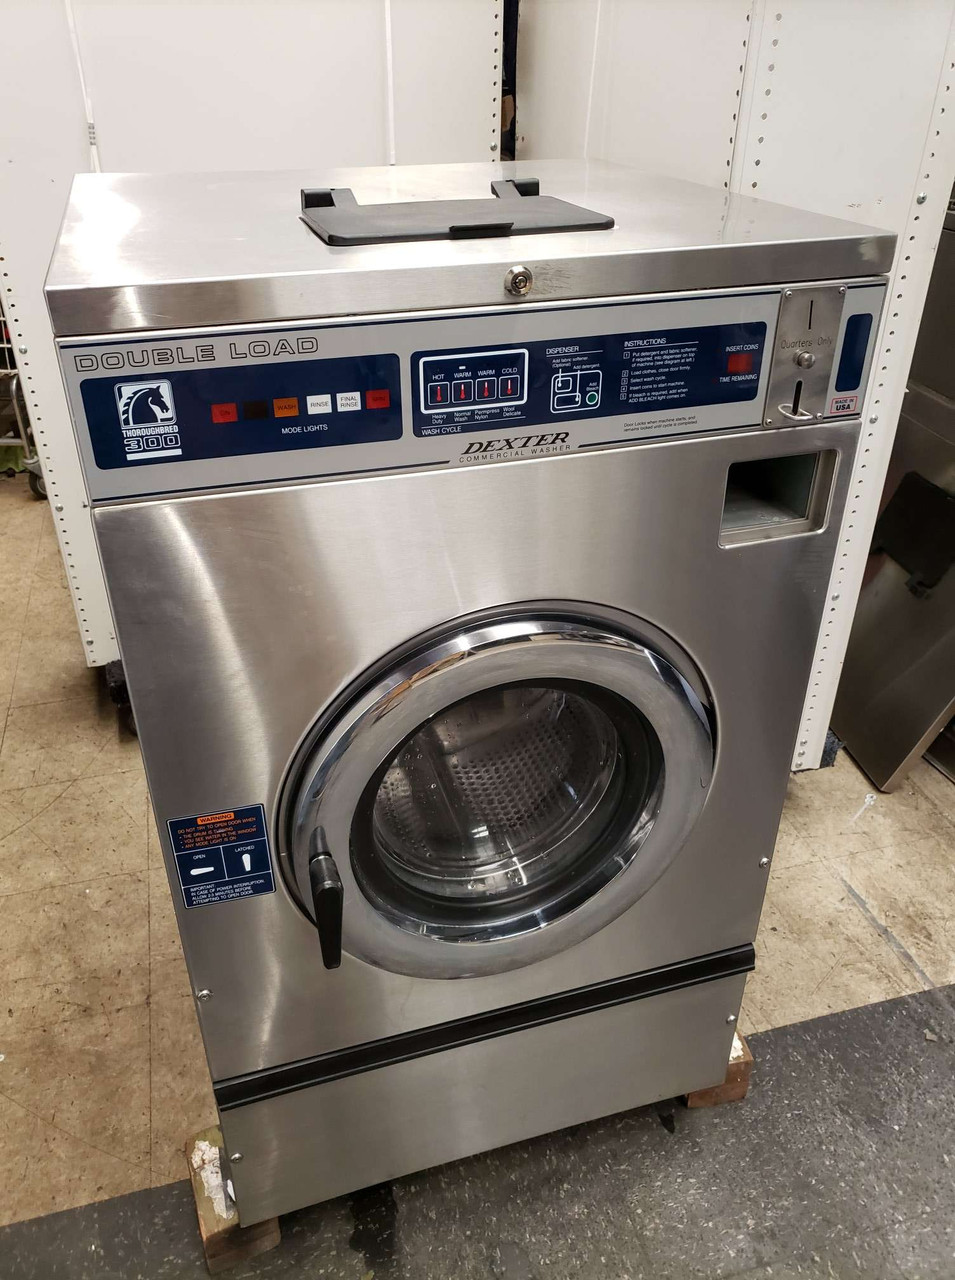 DEXTER T-300 COMMERCIAL FRONT LOAD WASHING MACHINE, 18 LBS CAPACITY MODEL:  WCN18AASS SERIAL NO: 20009000436382